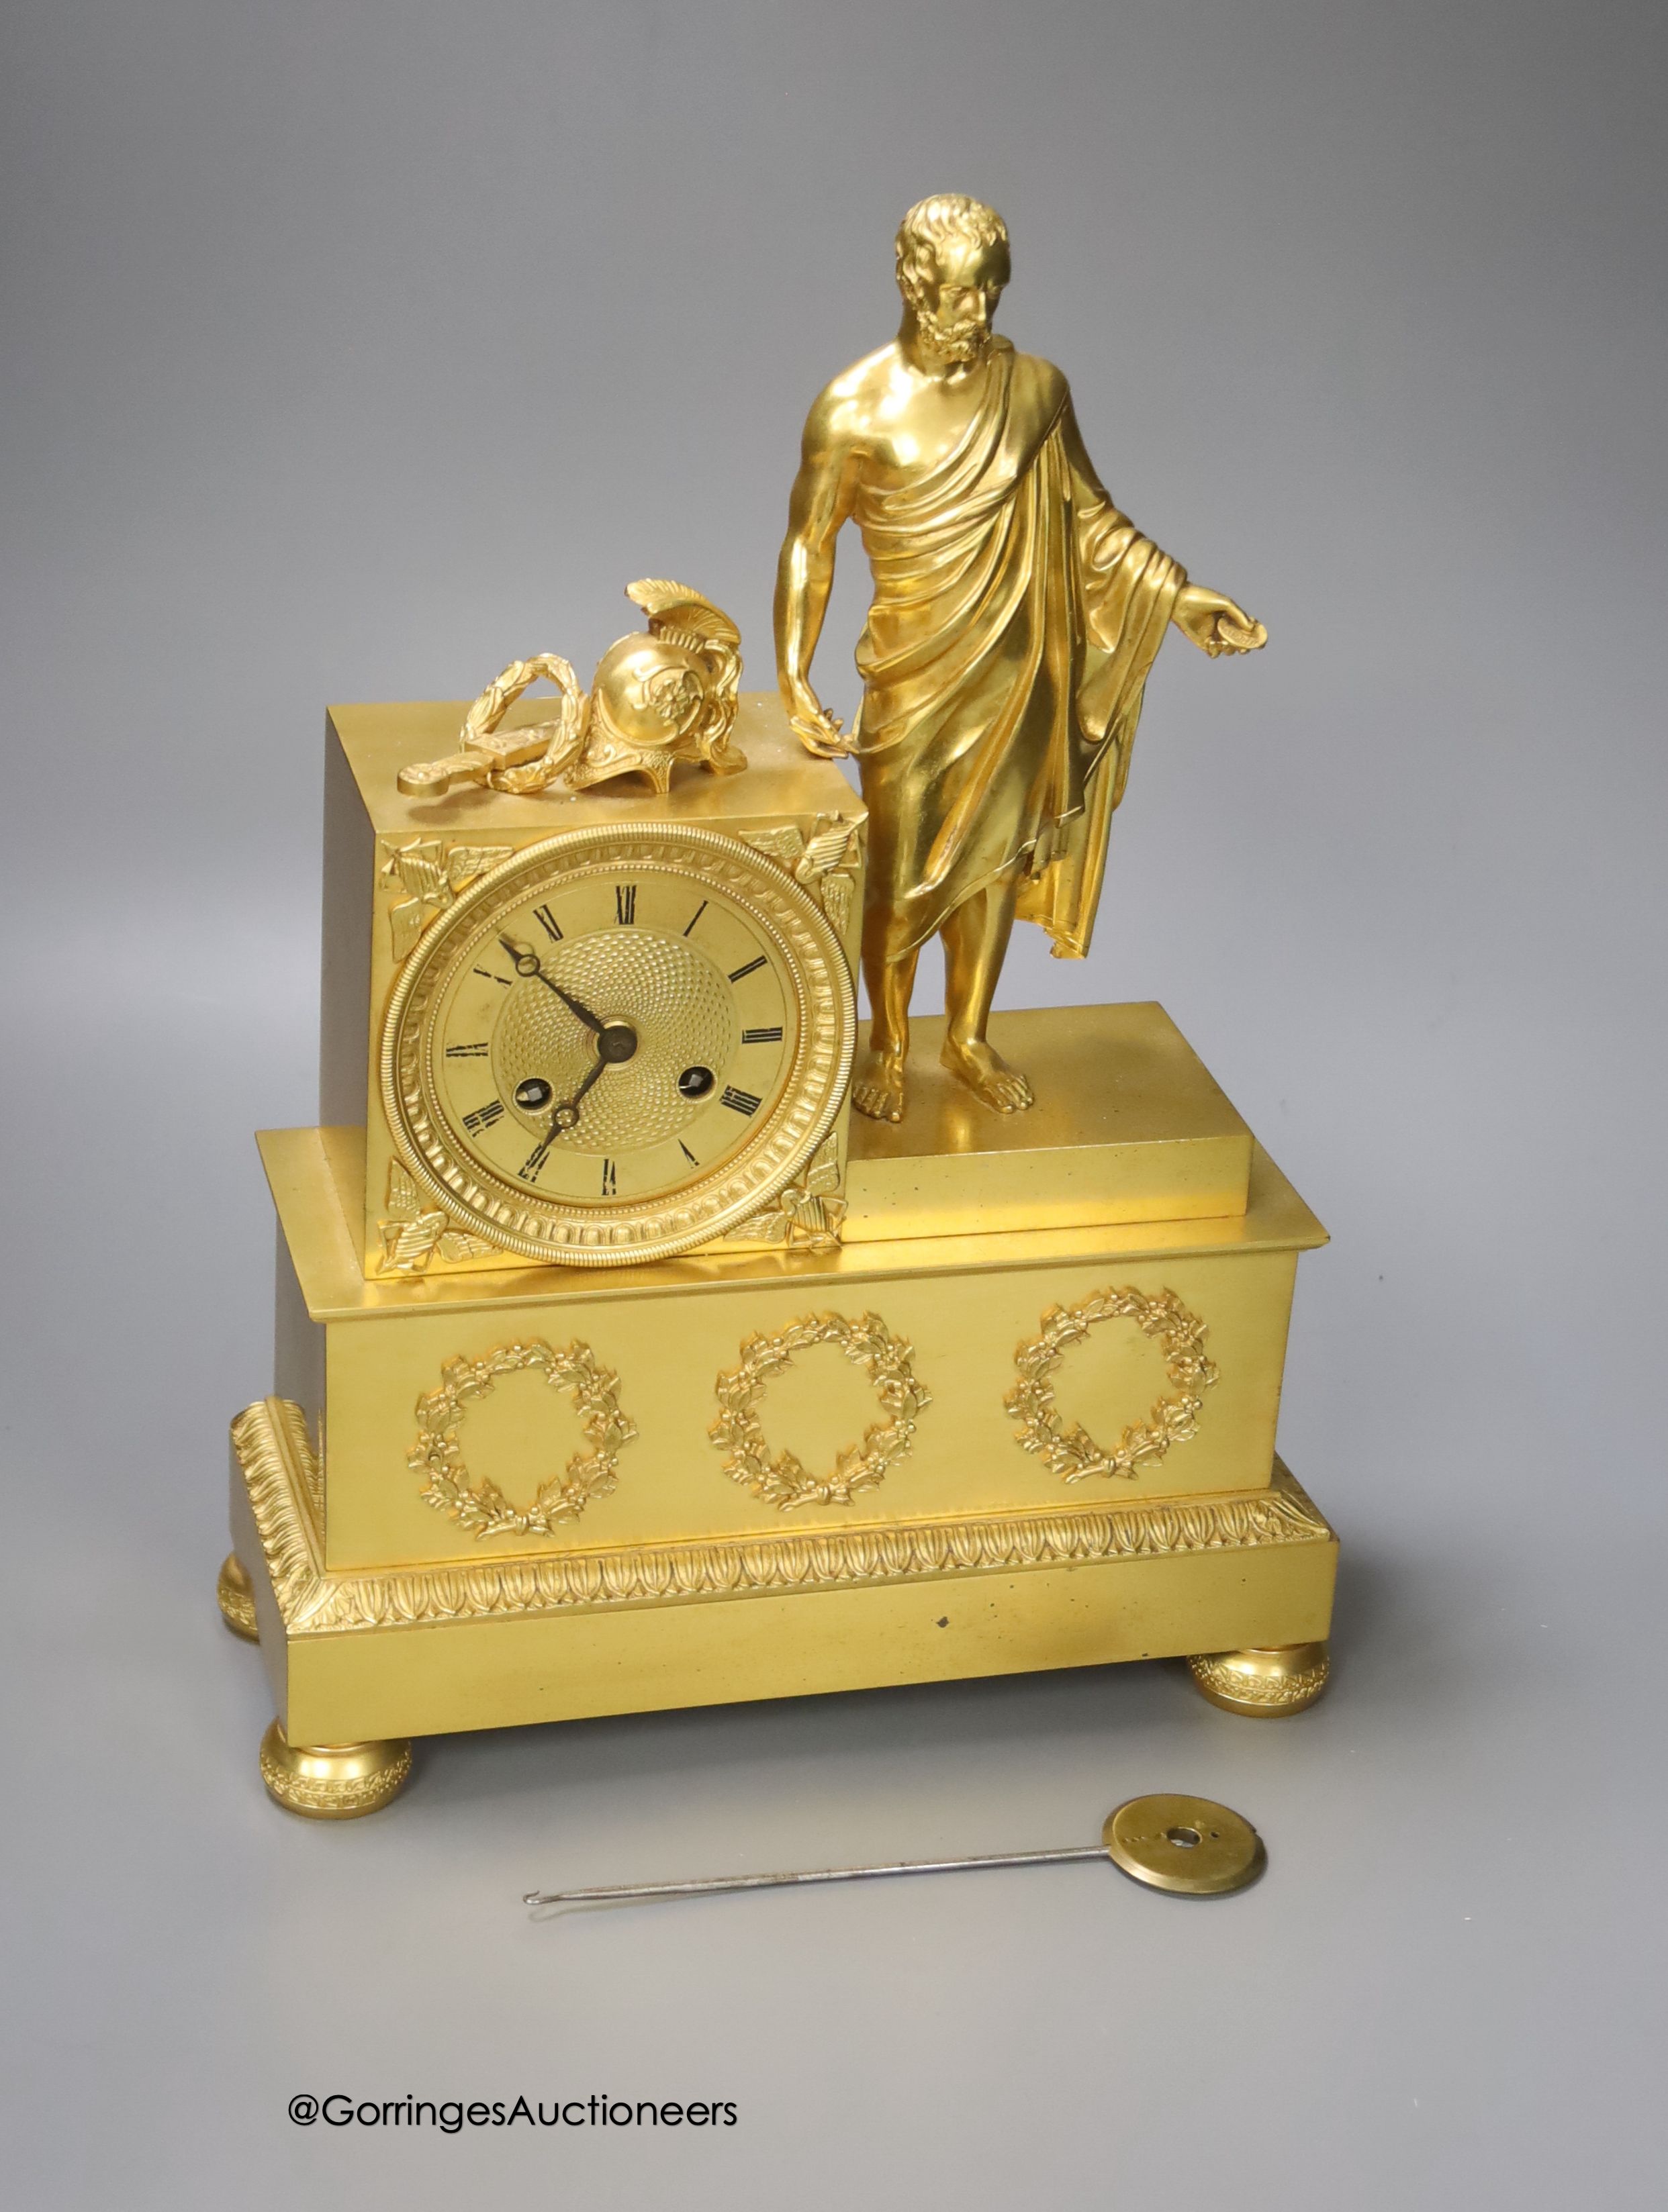 A French Empire style ormolu mantel clock, c.1820, countwheel striking on a bell, height 32cm